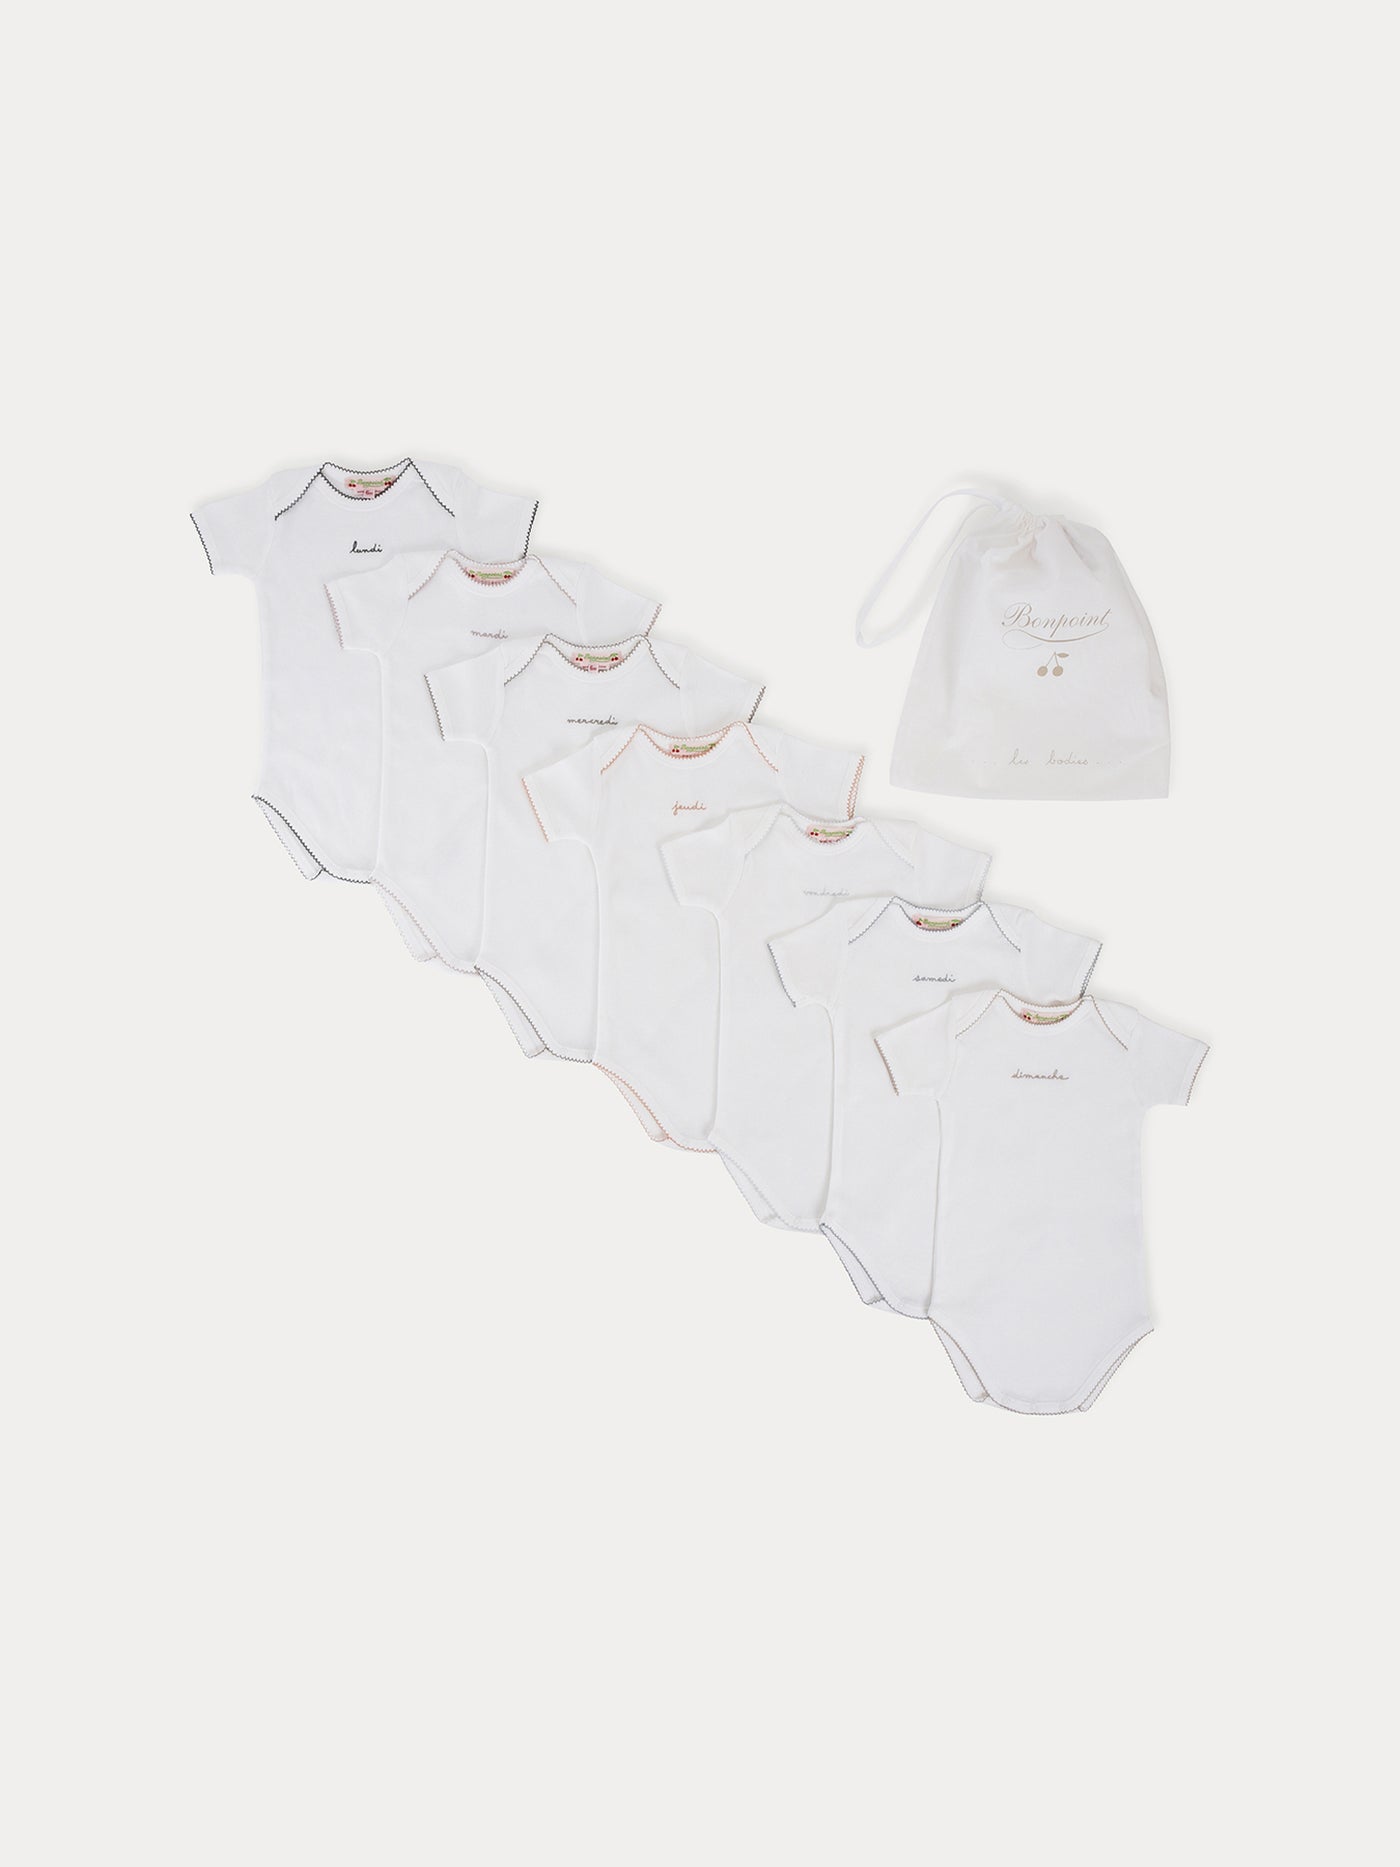 Baby Day-of-the-Week Onesies white